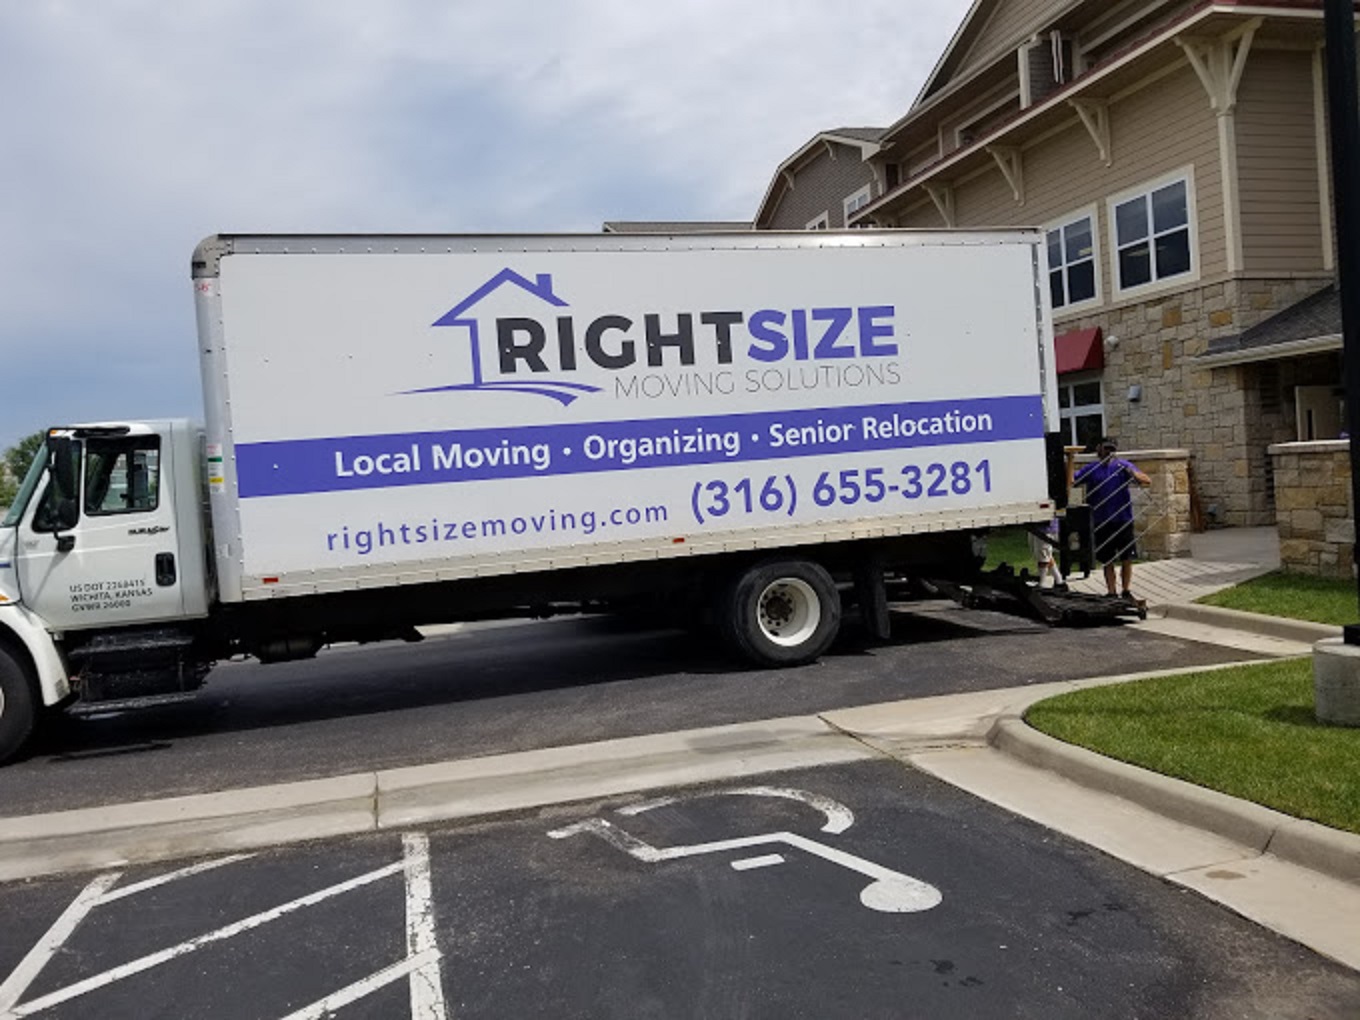 Rightsize Moving Solutions Mover in Wichita